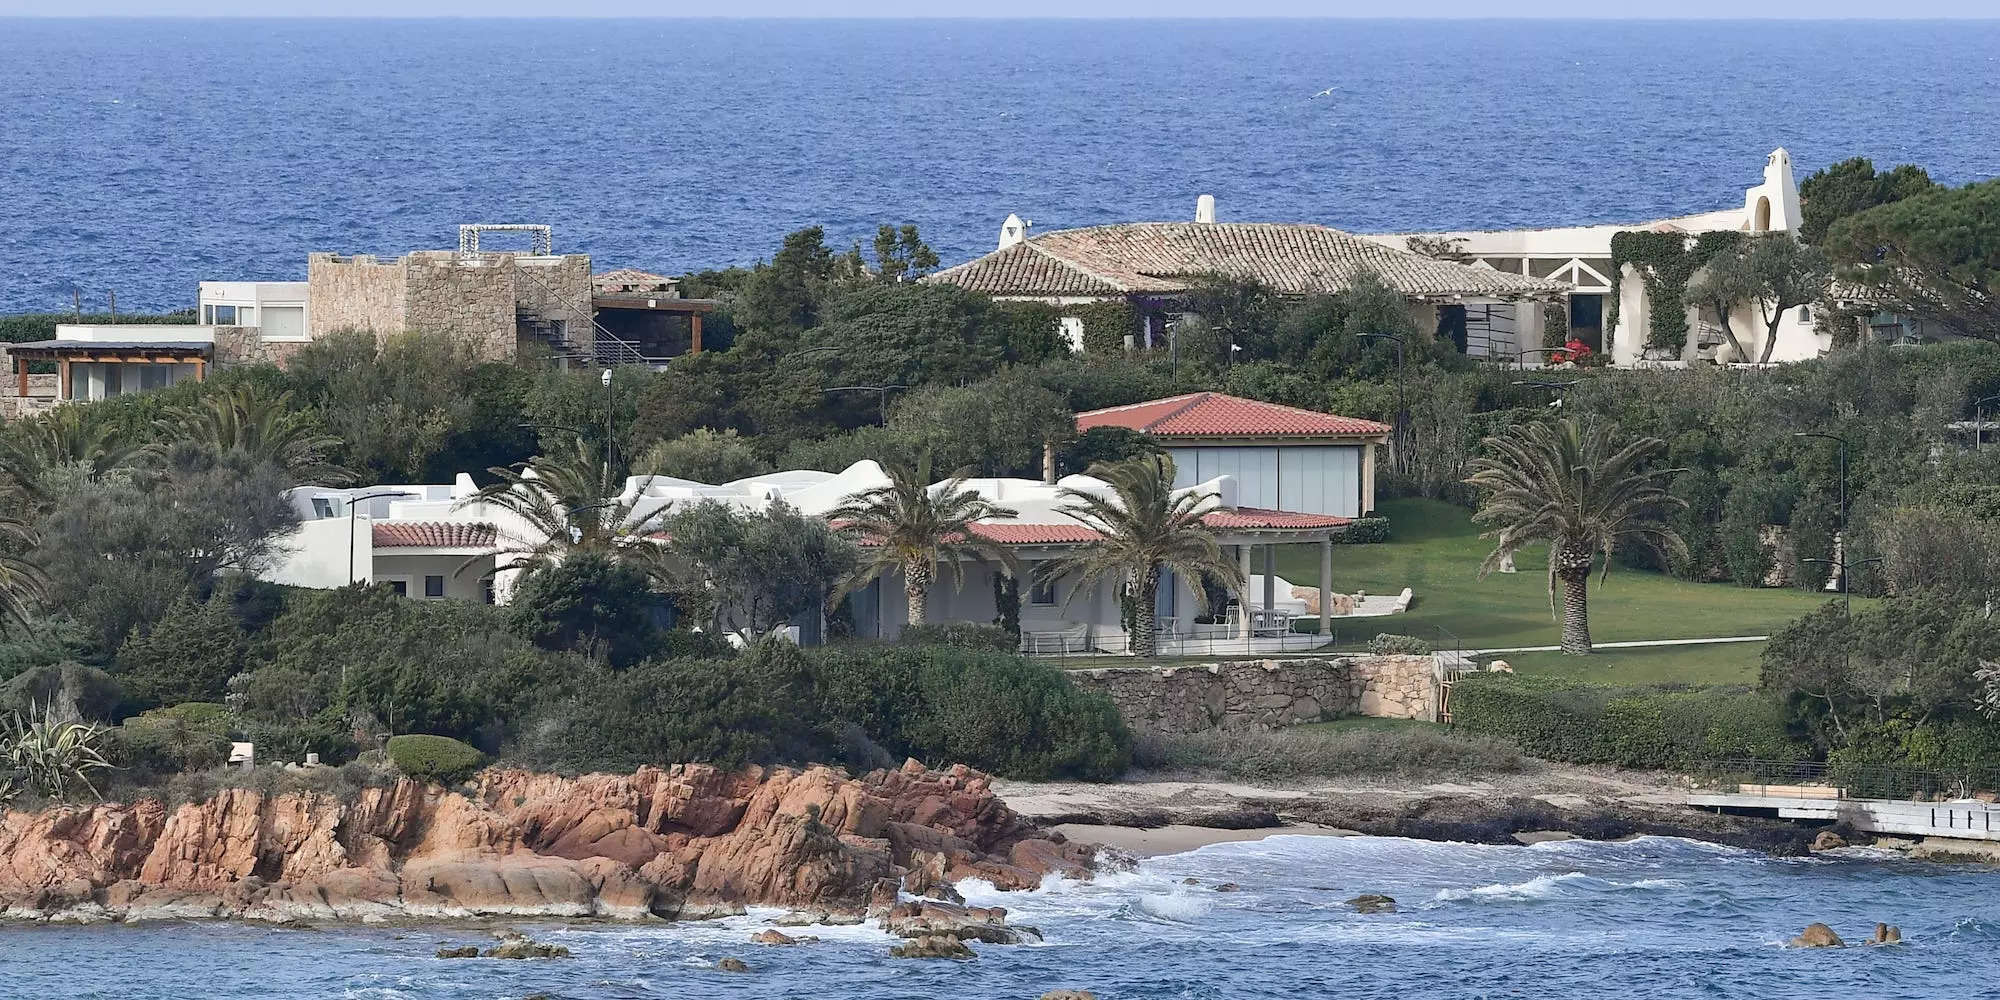 A panoramic view of a villa complex in Sardinia, Italy, belonging to Russian oligarch Alisher Usmanov, on March 20, 2022.